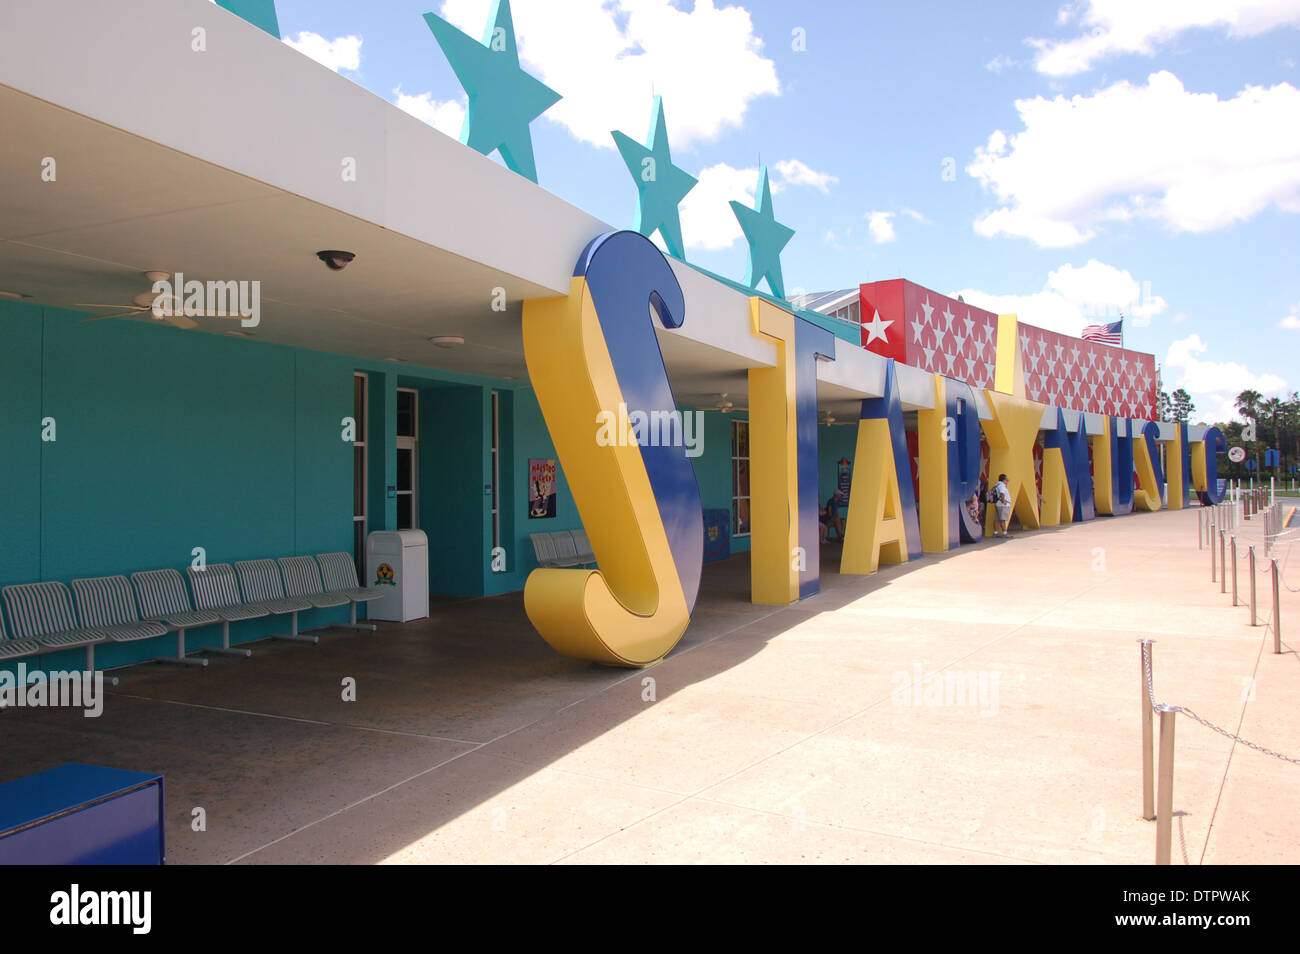 The All Star Sport And Music Resort entrance, Disney, Florida, U.S.A Stock Photo